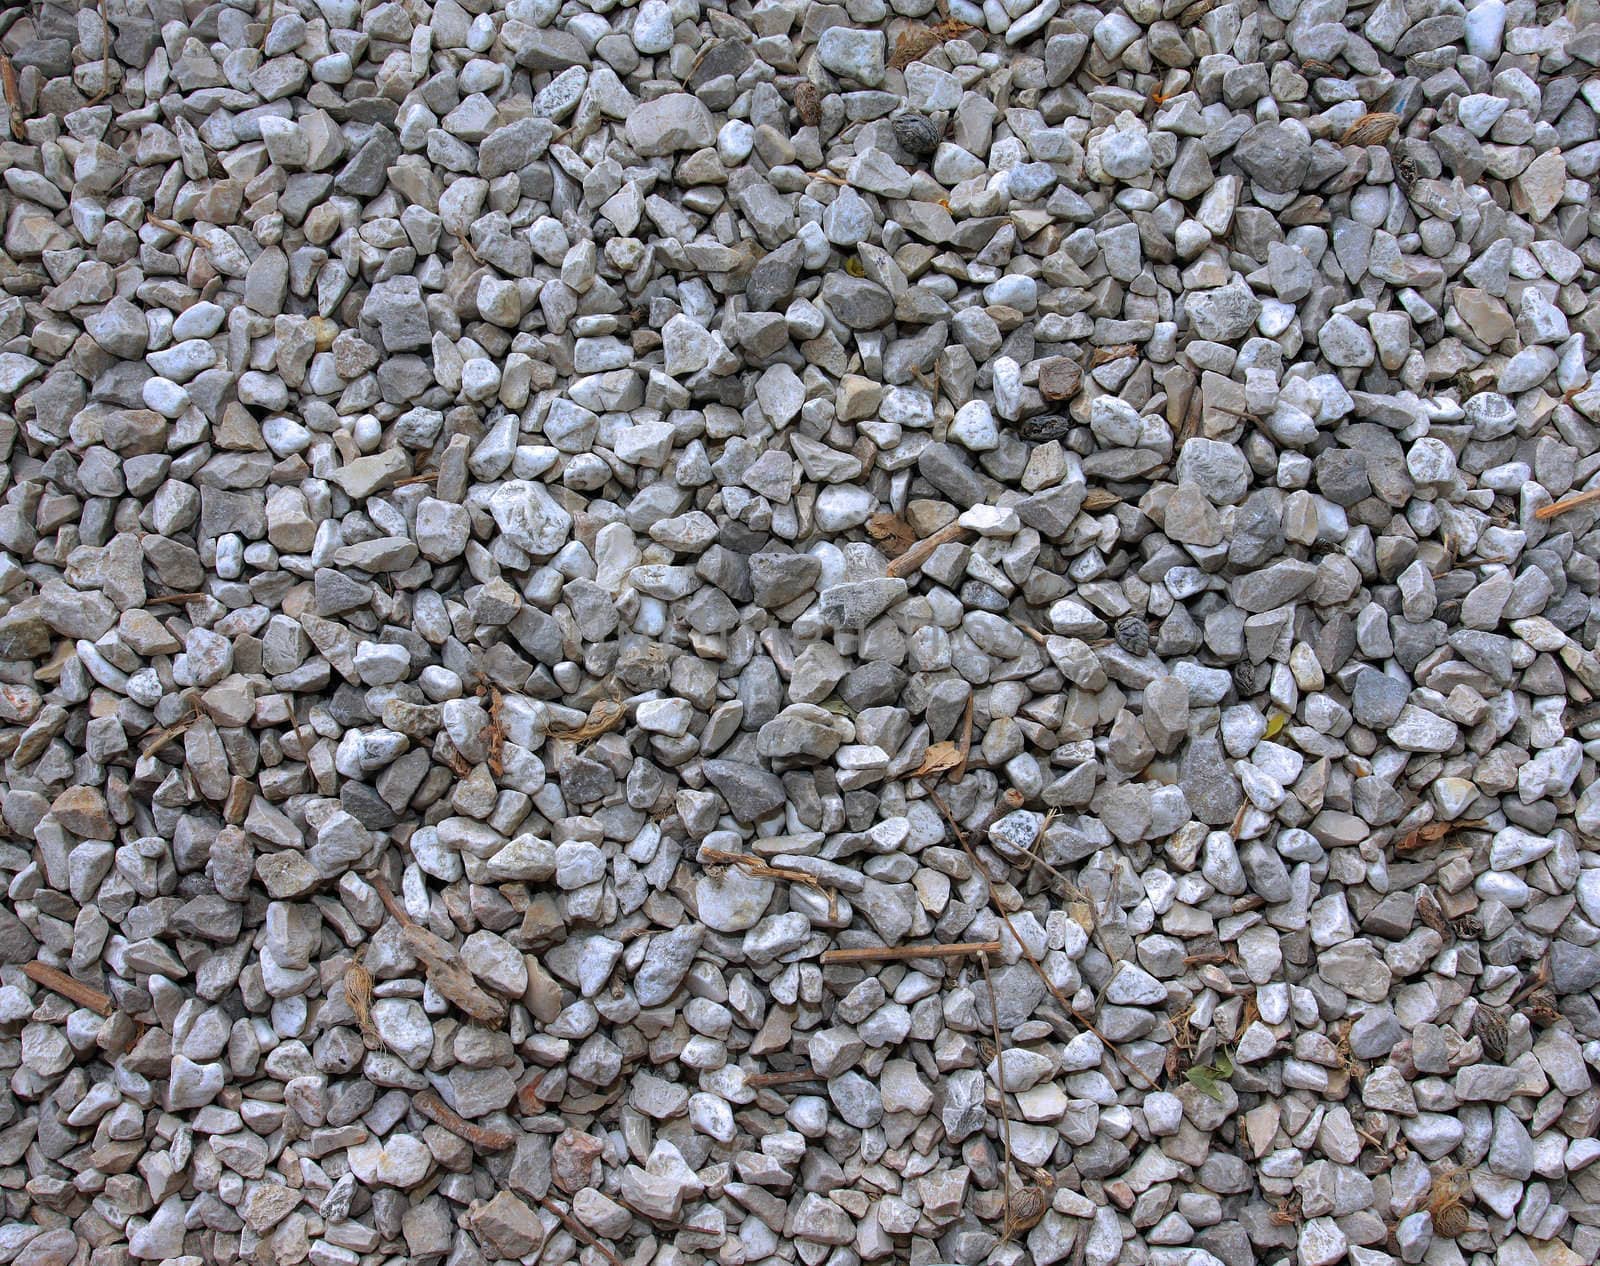 Gravel surface with dry autumn leaves and sticks on.